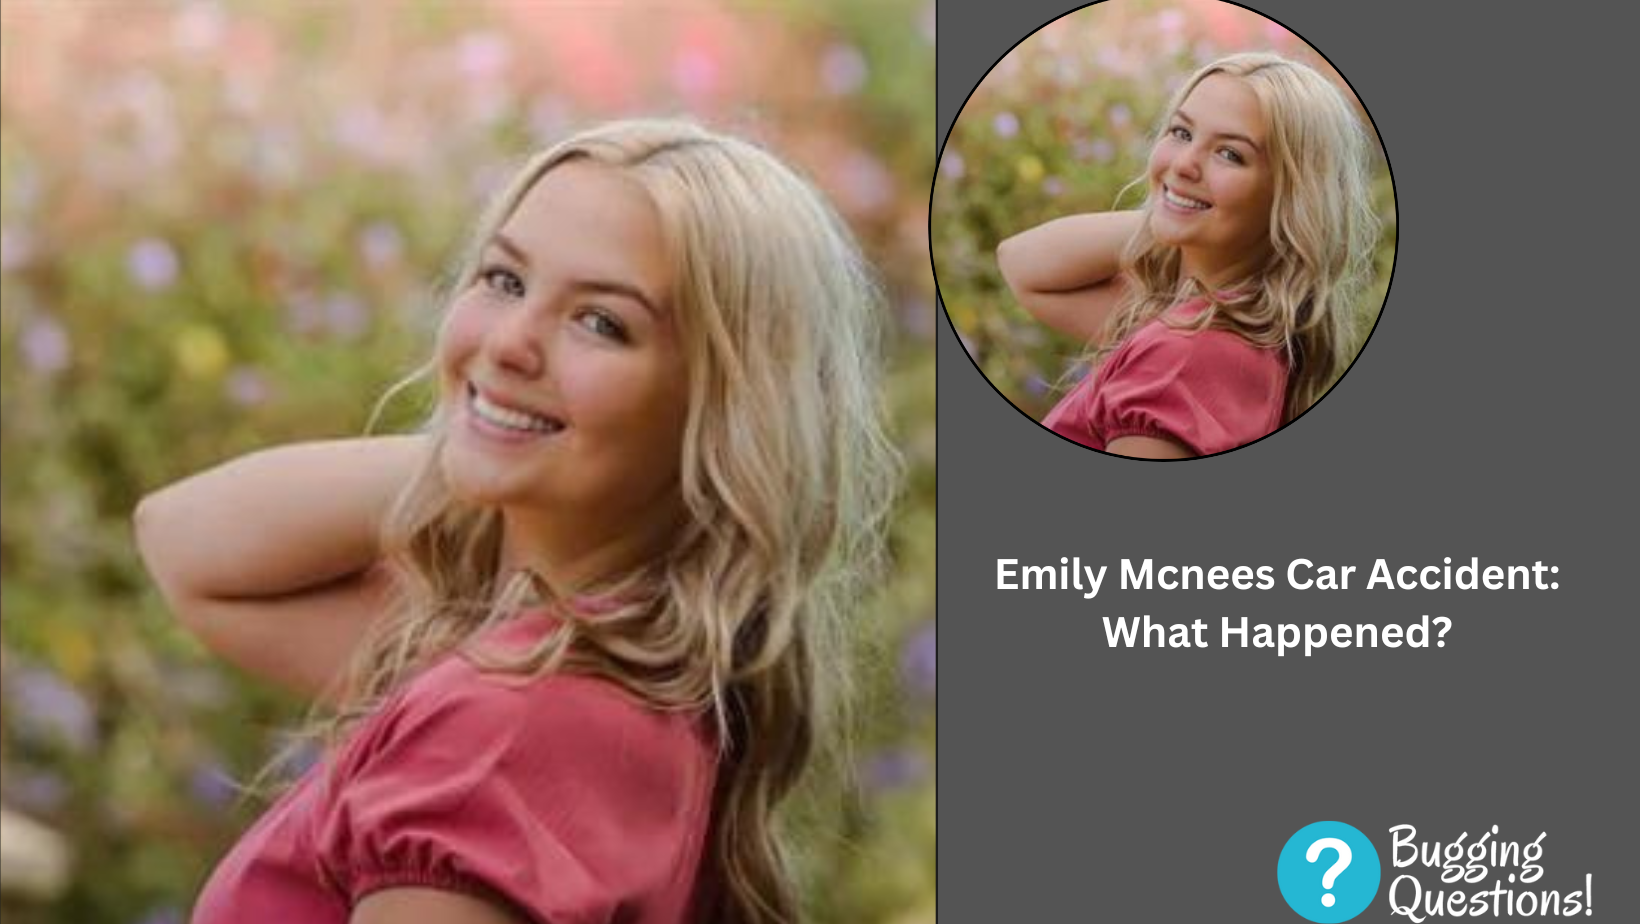 Emily Mcnees Car Accident: What Happened?